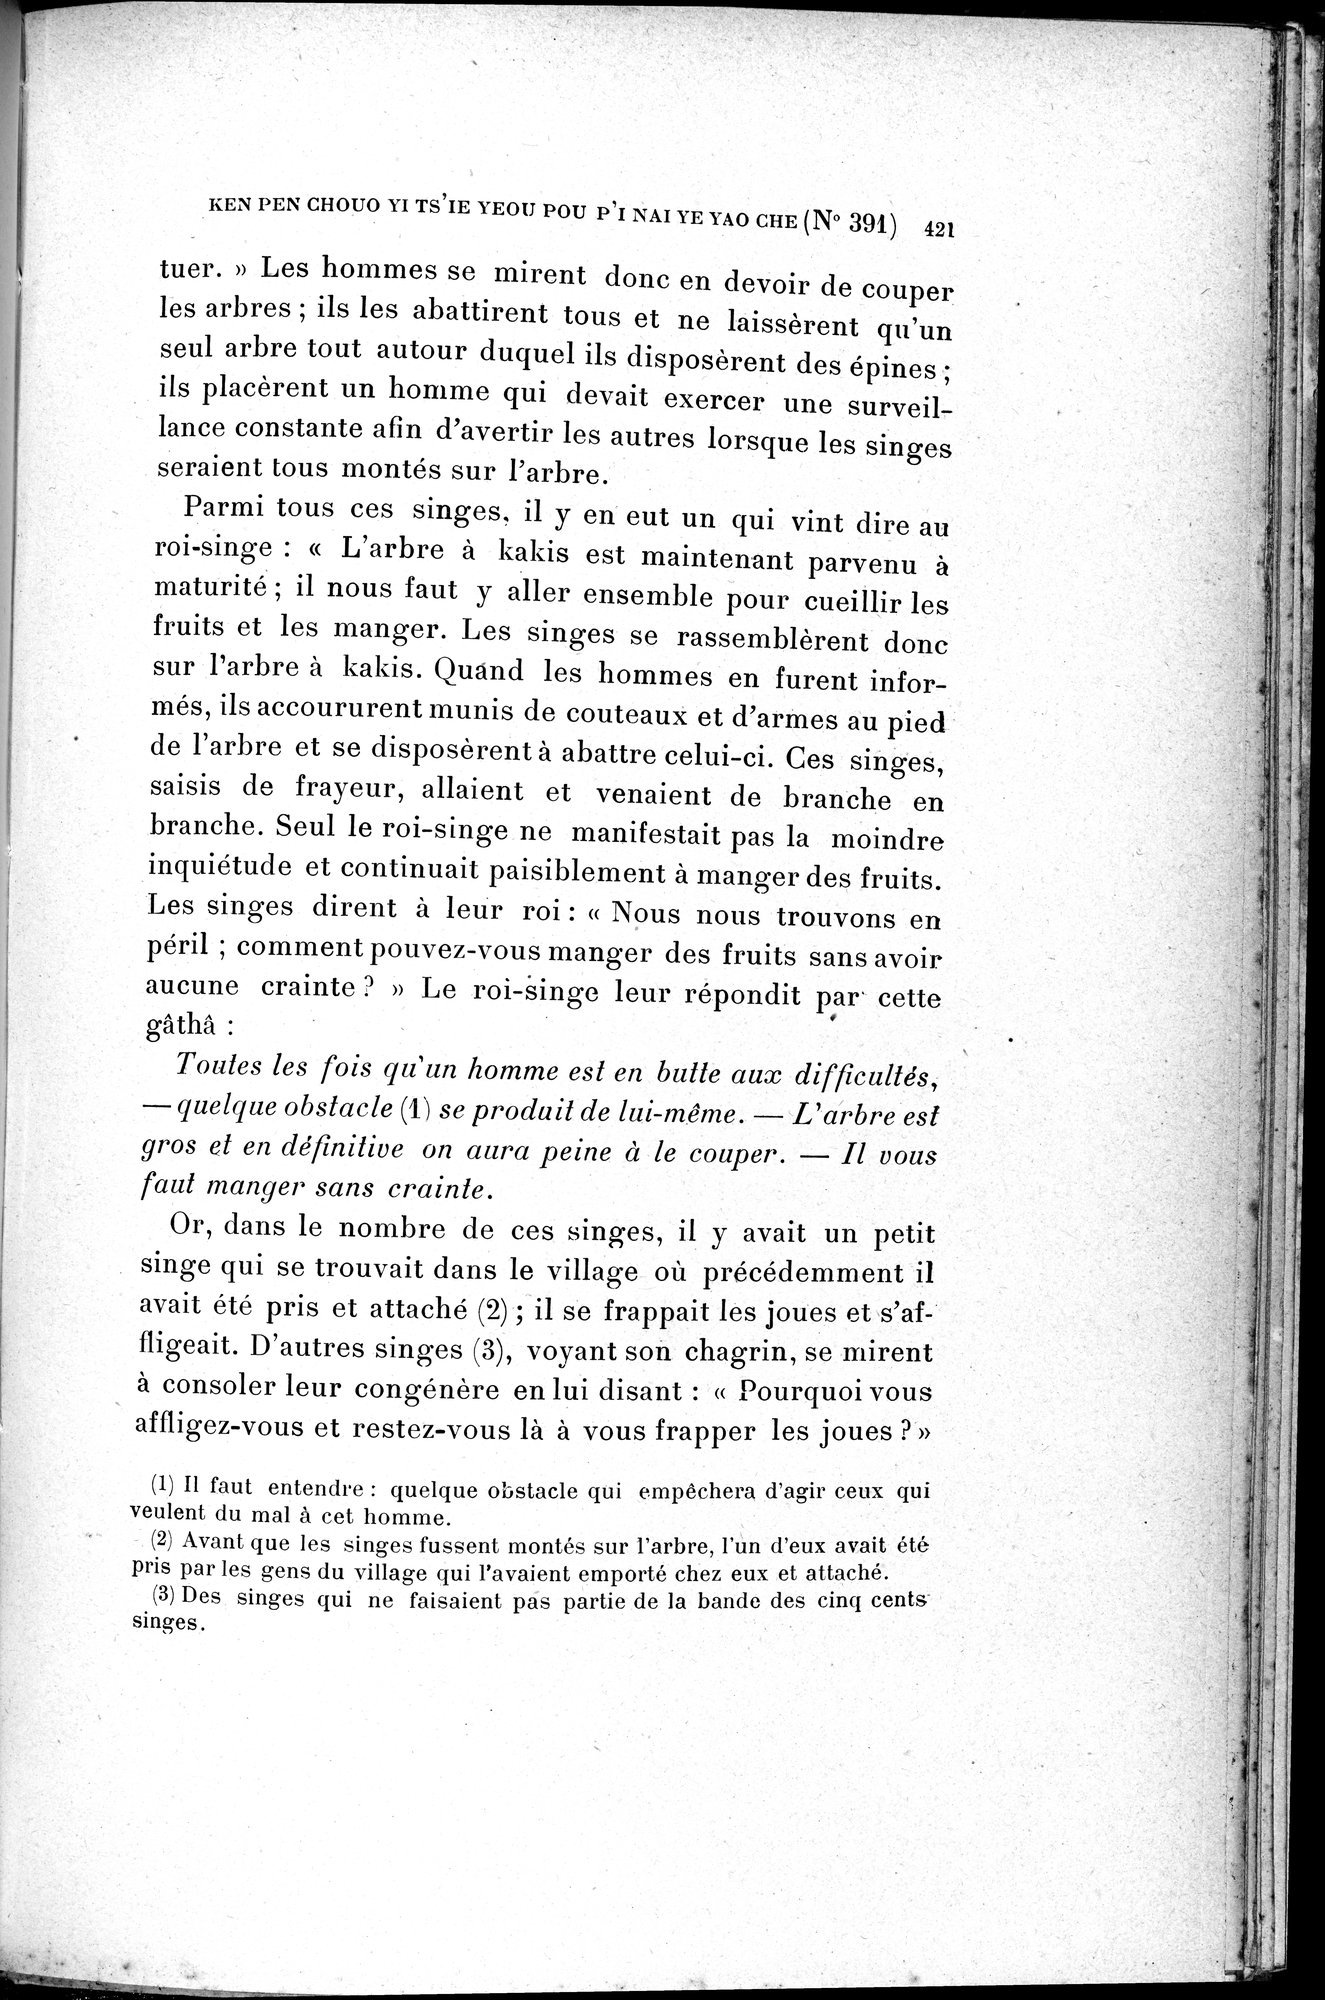 Cinq Cents Contes et Apologues : vol.2 / Page 435 (Grayscale High Resolution Image)